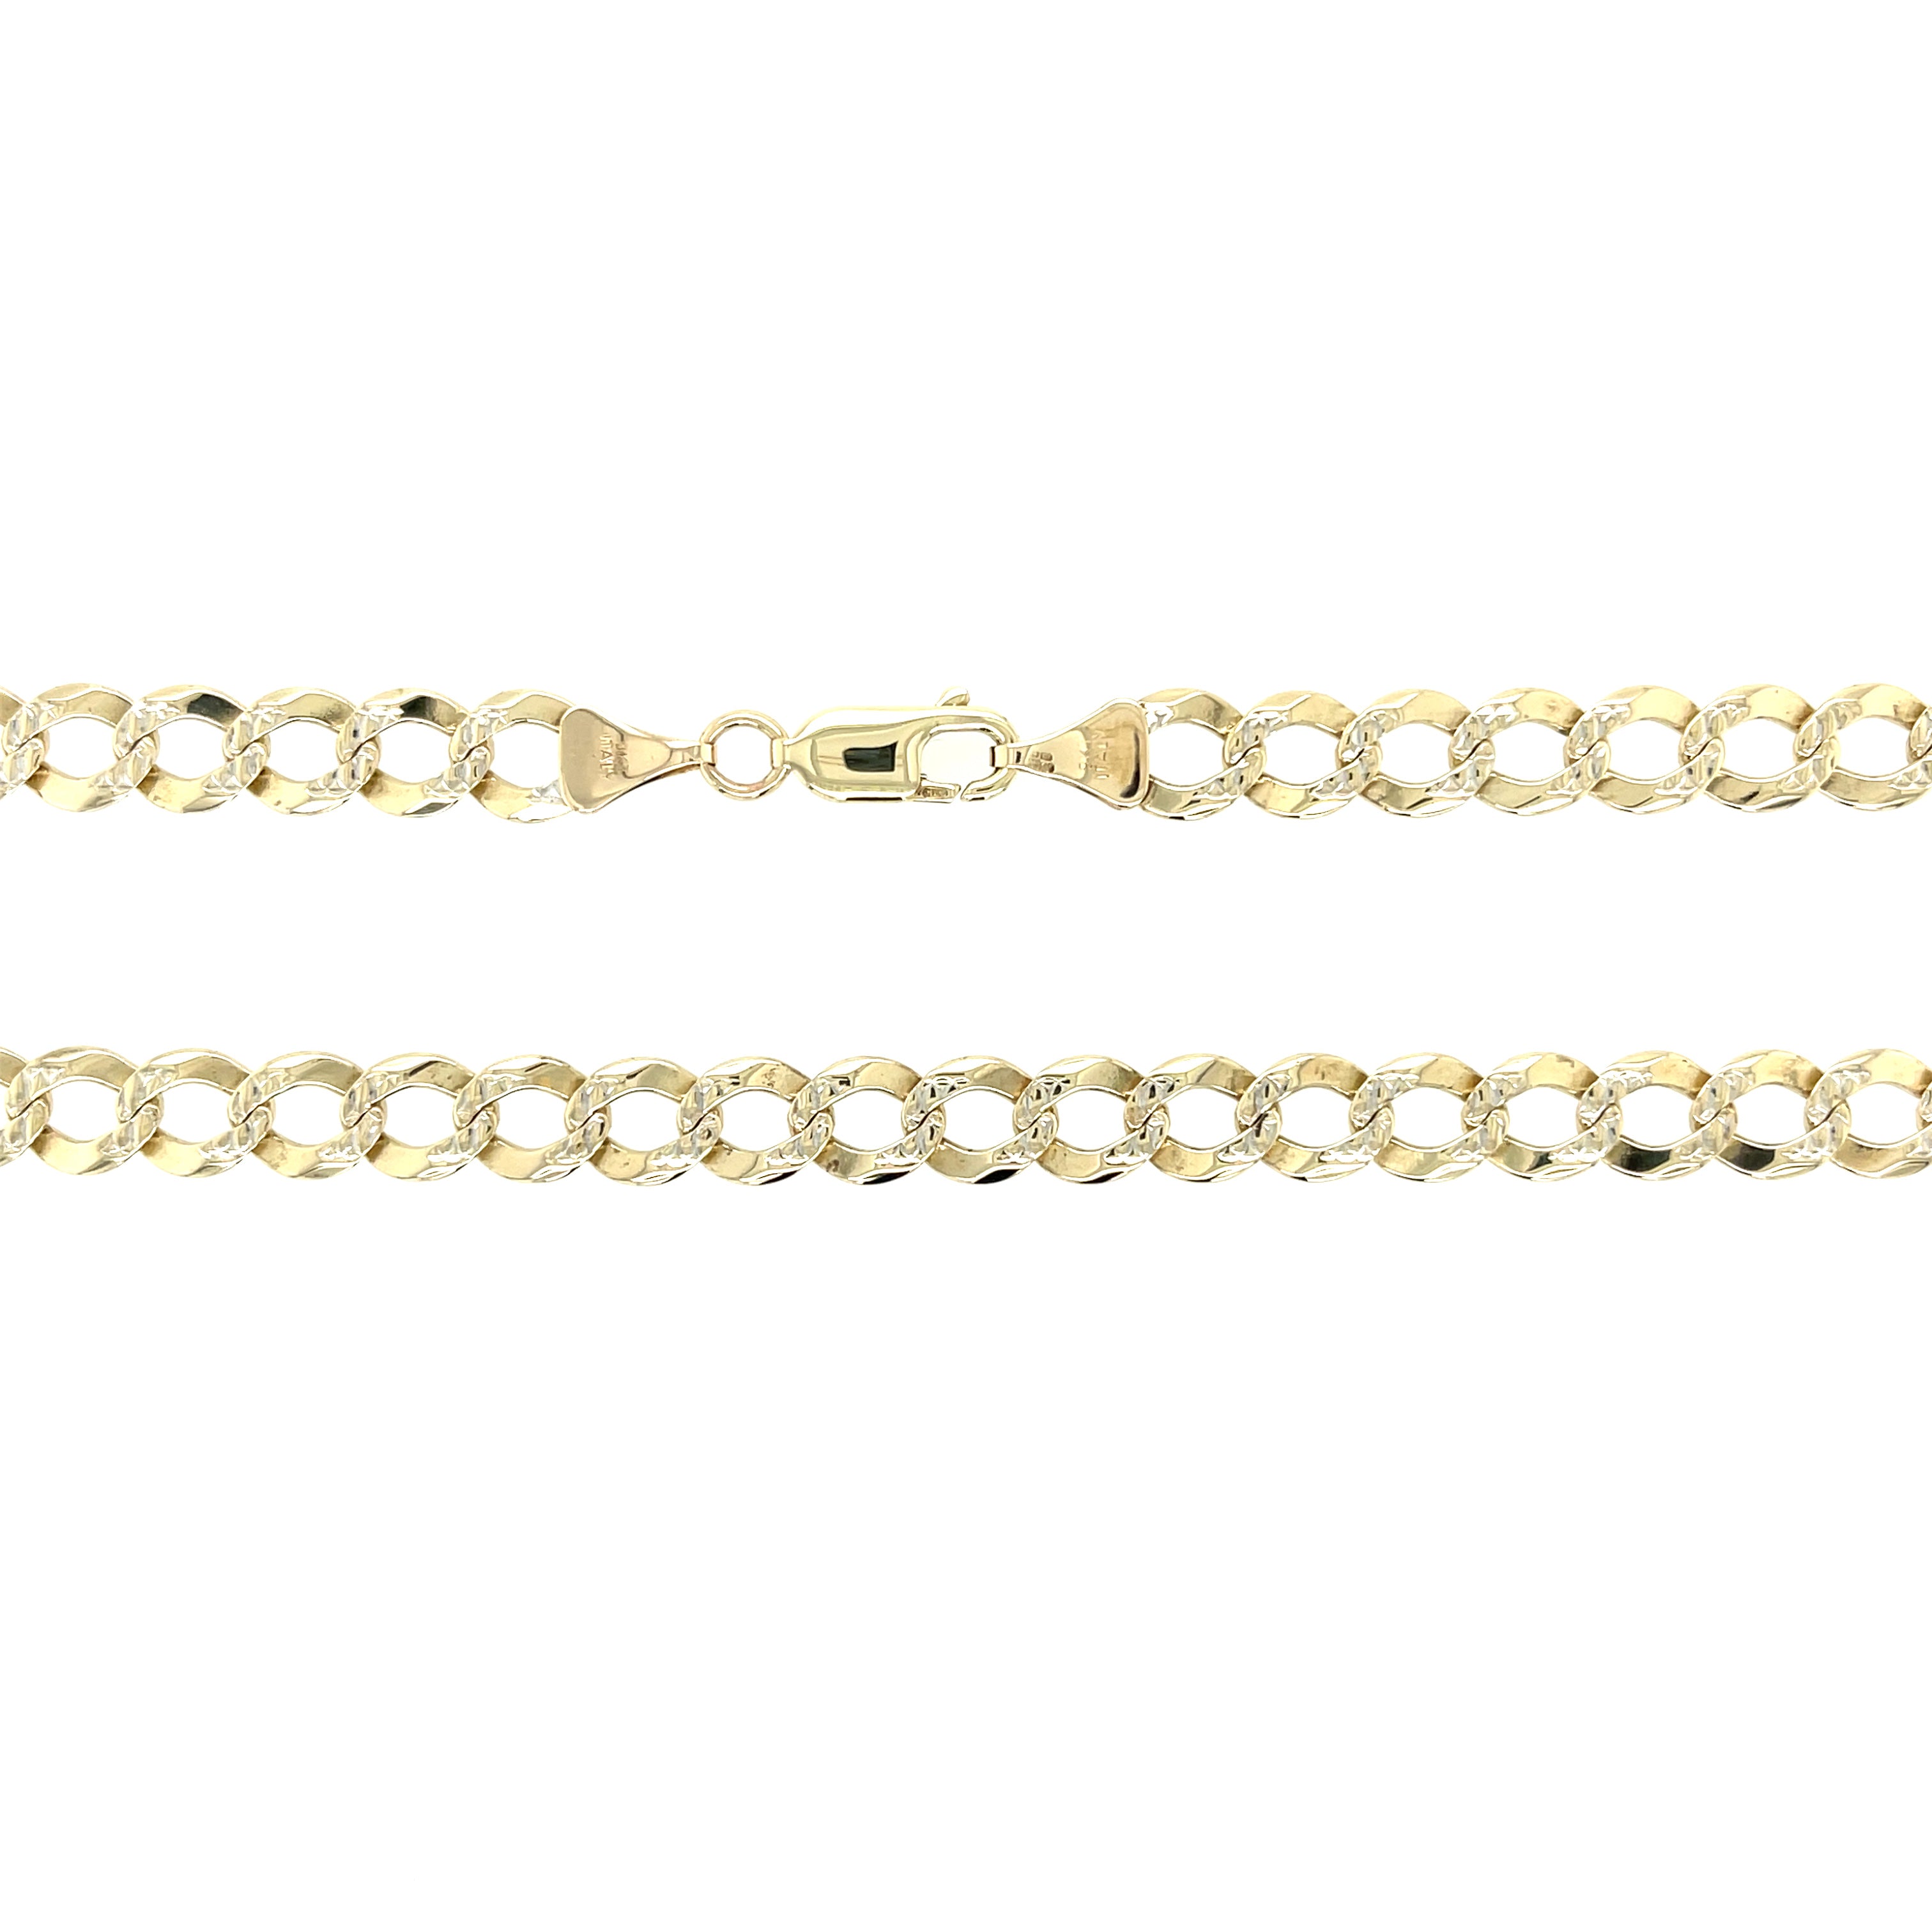 9ct Yellow & White Gold 24 Inch Frosted Link Curb Chain - 23.25g